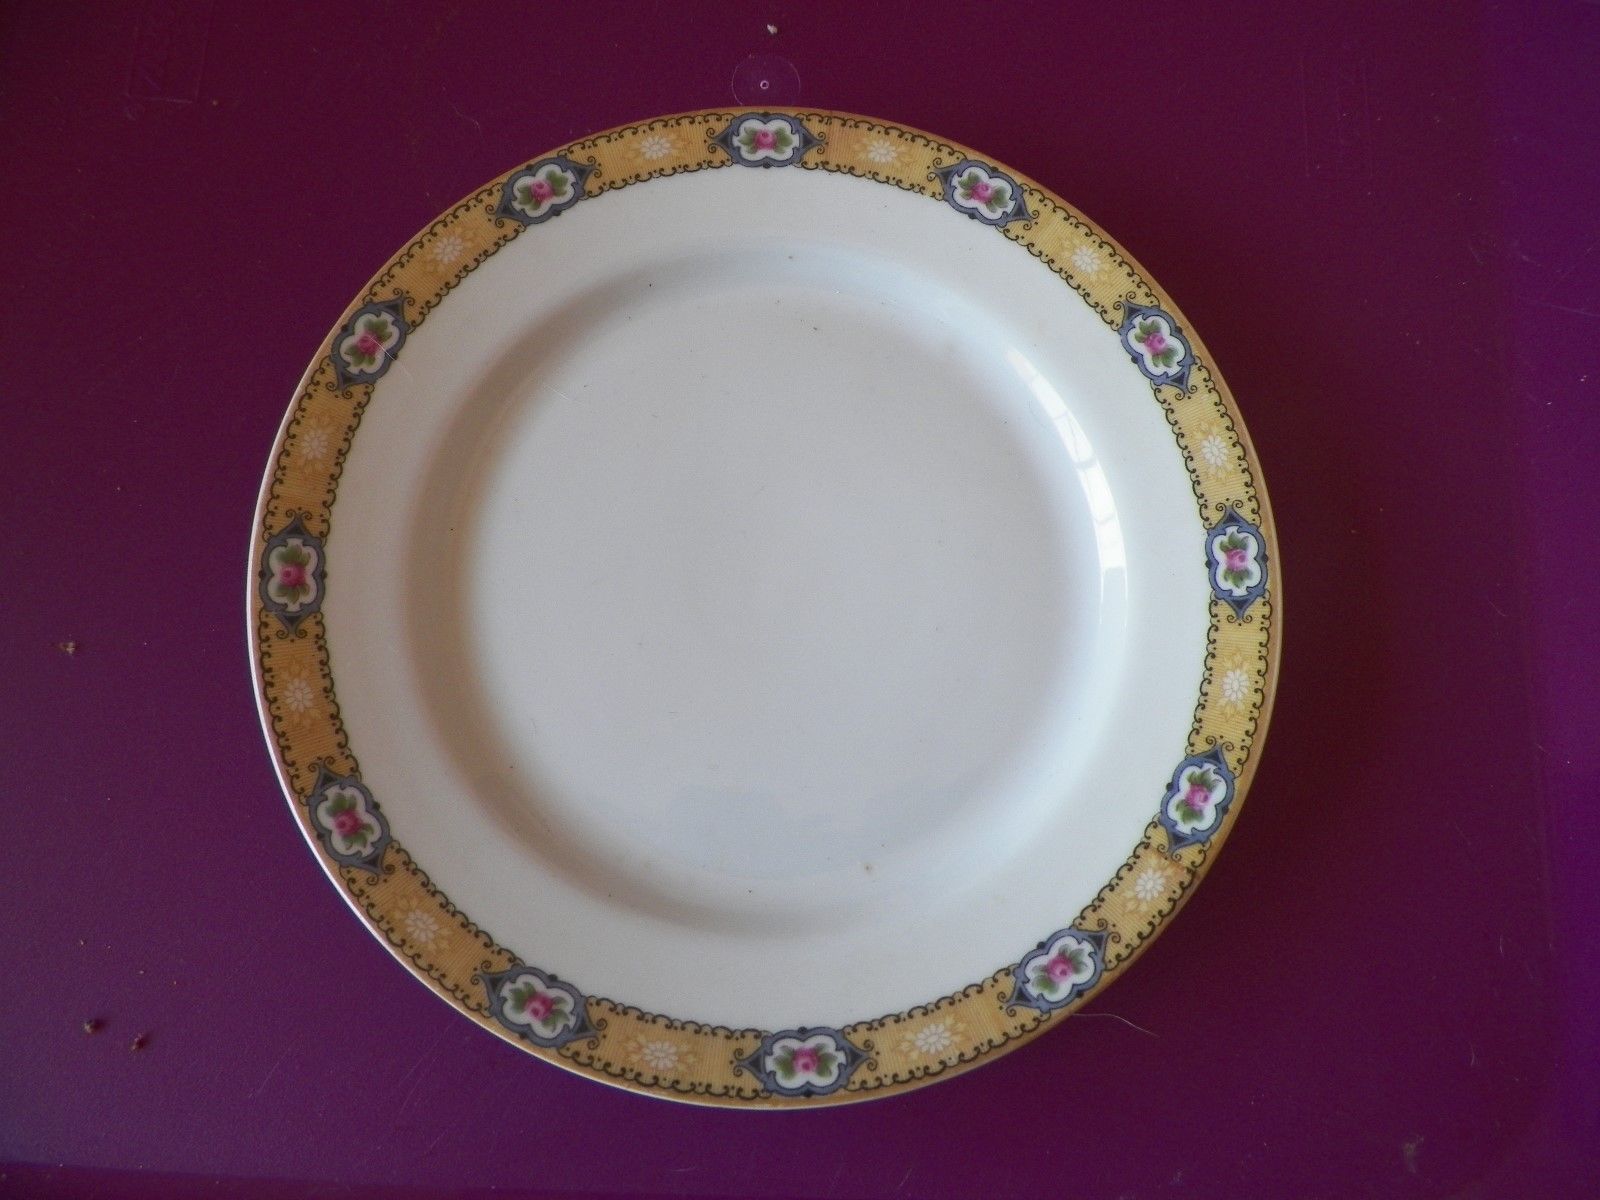 Heinrich Concord bread plate 5 available - $3.12